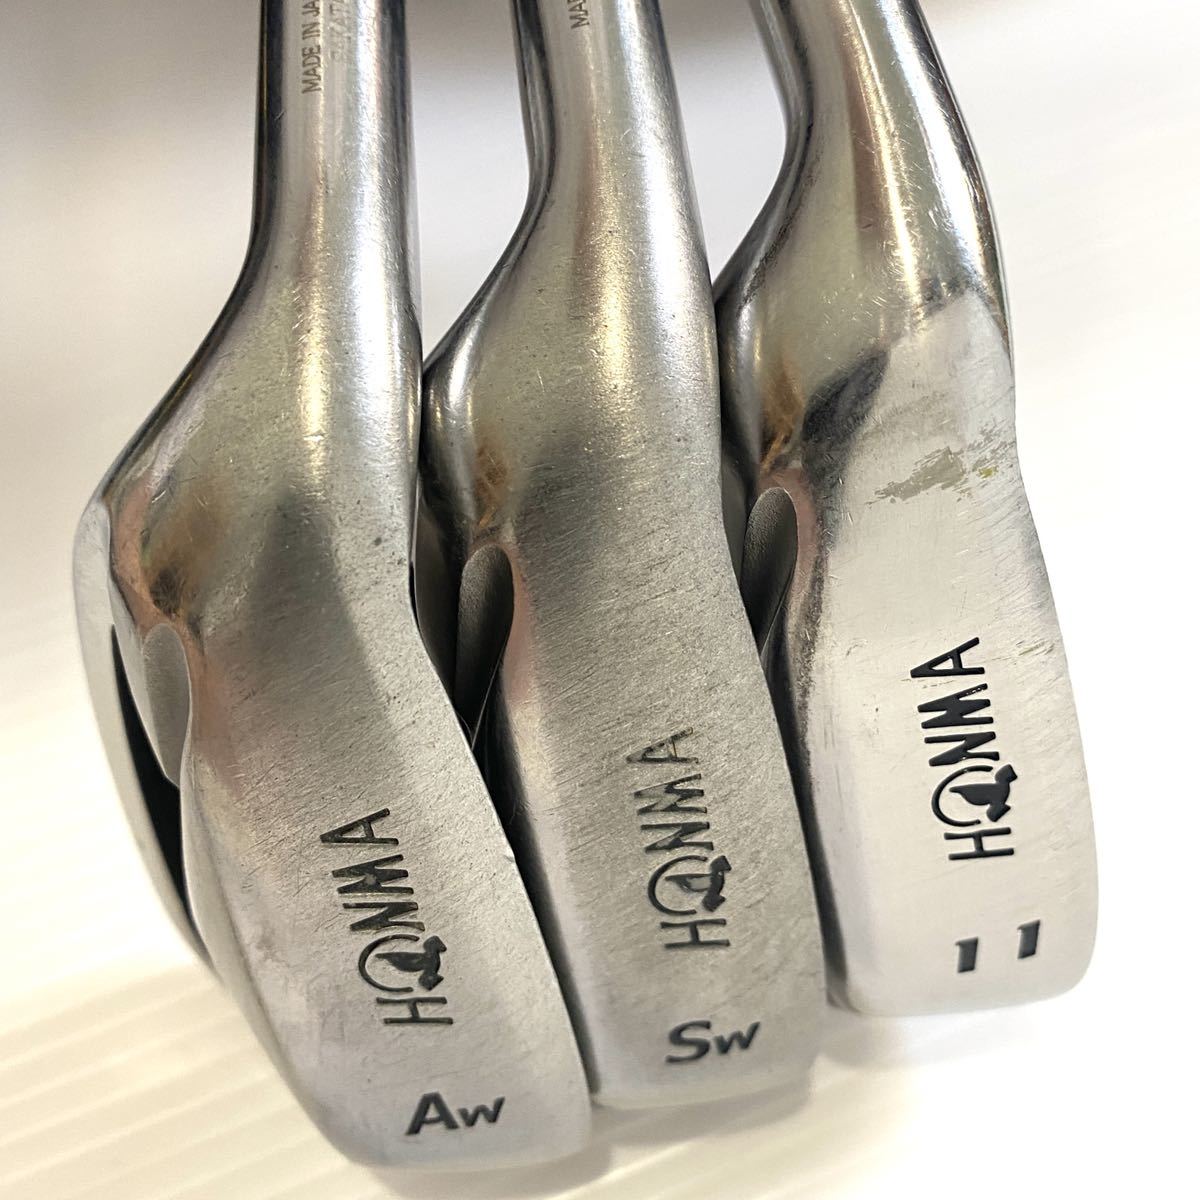 HONMA Be ZEAL 525 アイアンセット 日本製 ホンマ ビジール525 8本 6 7